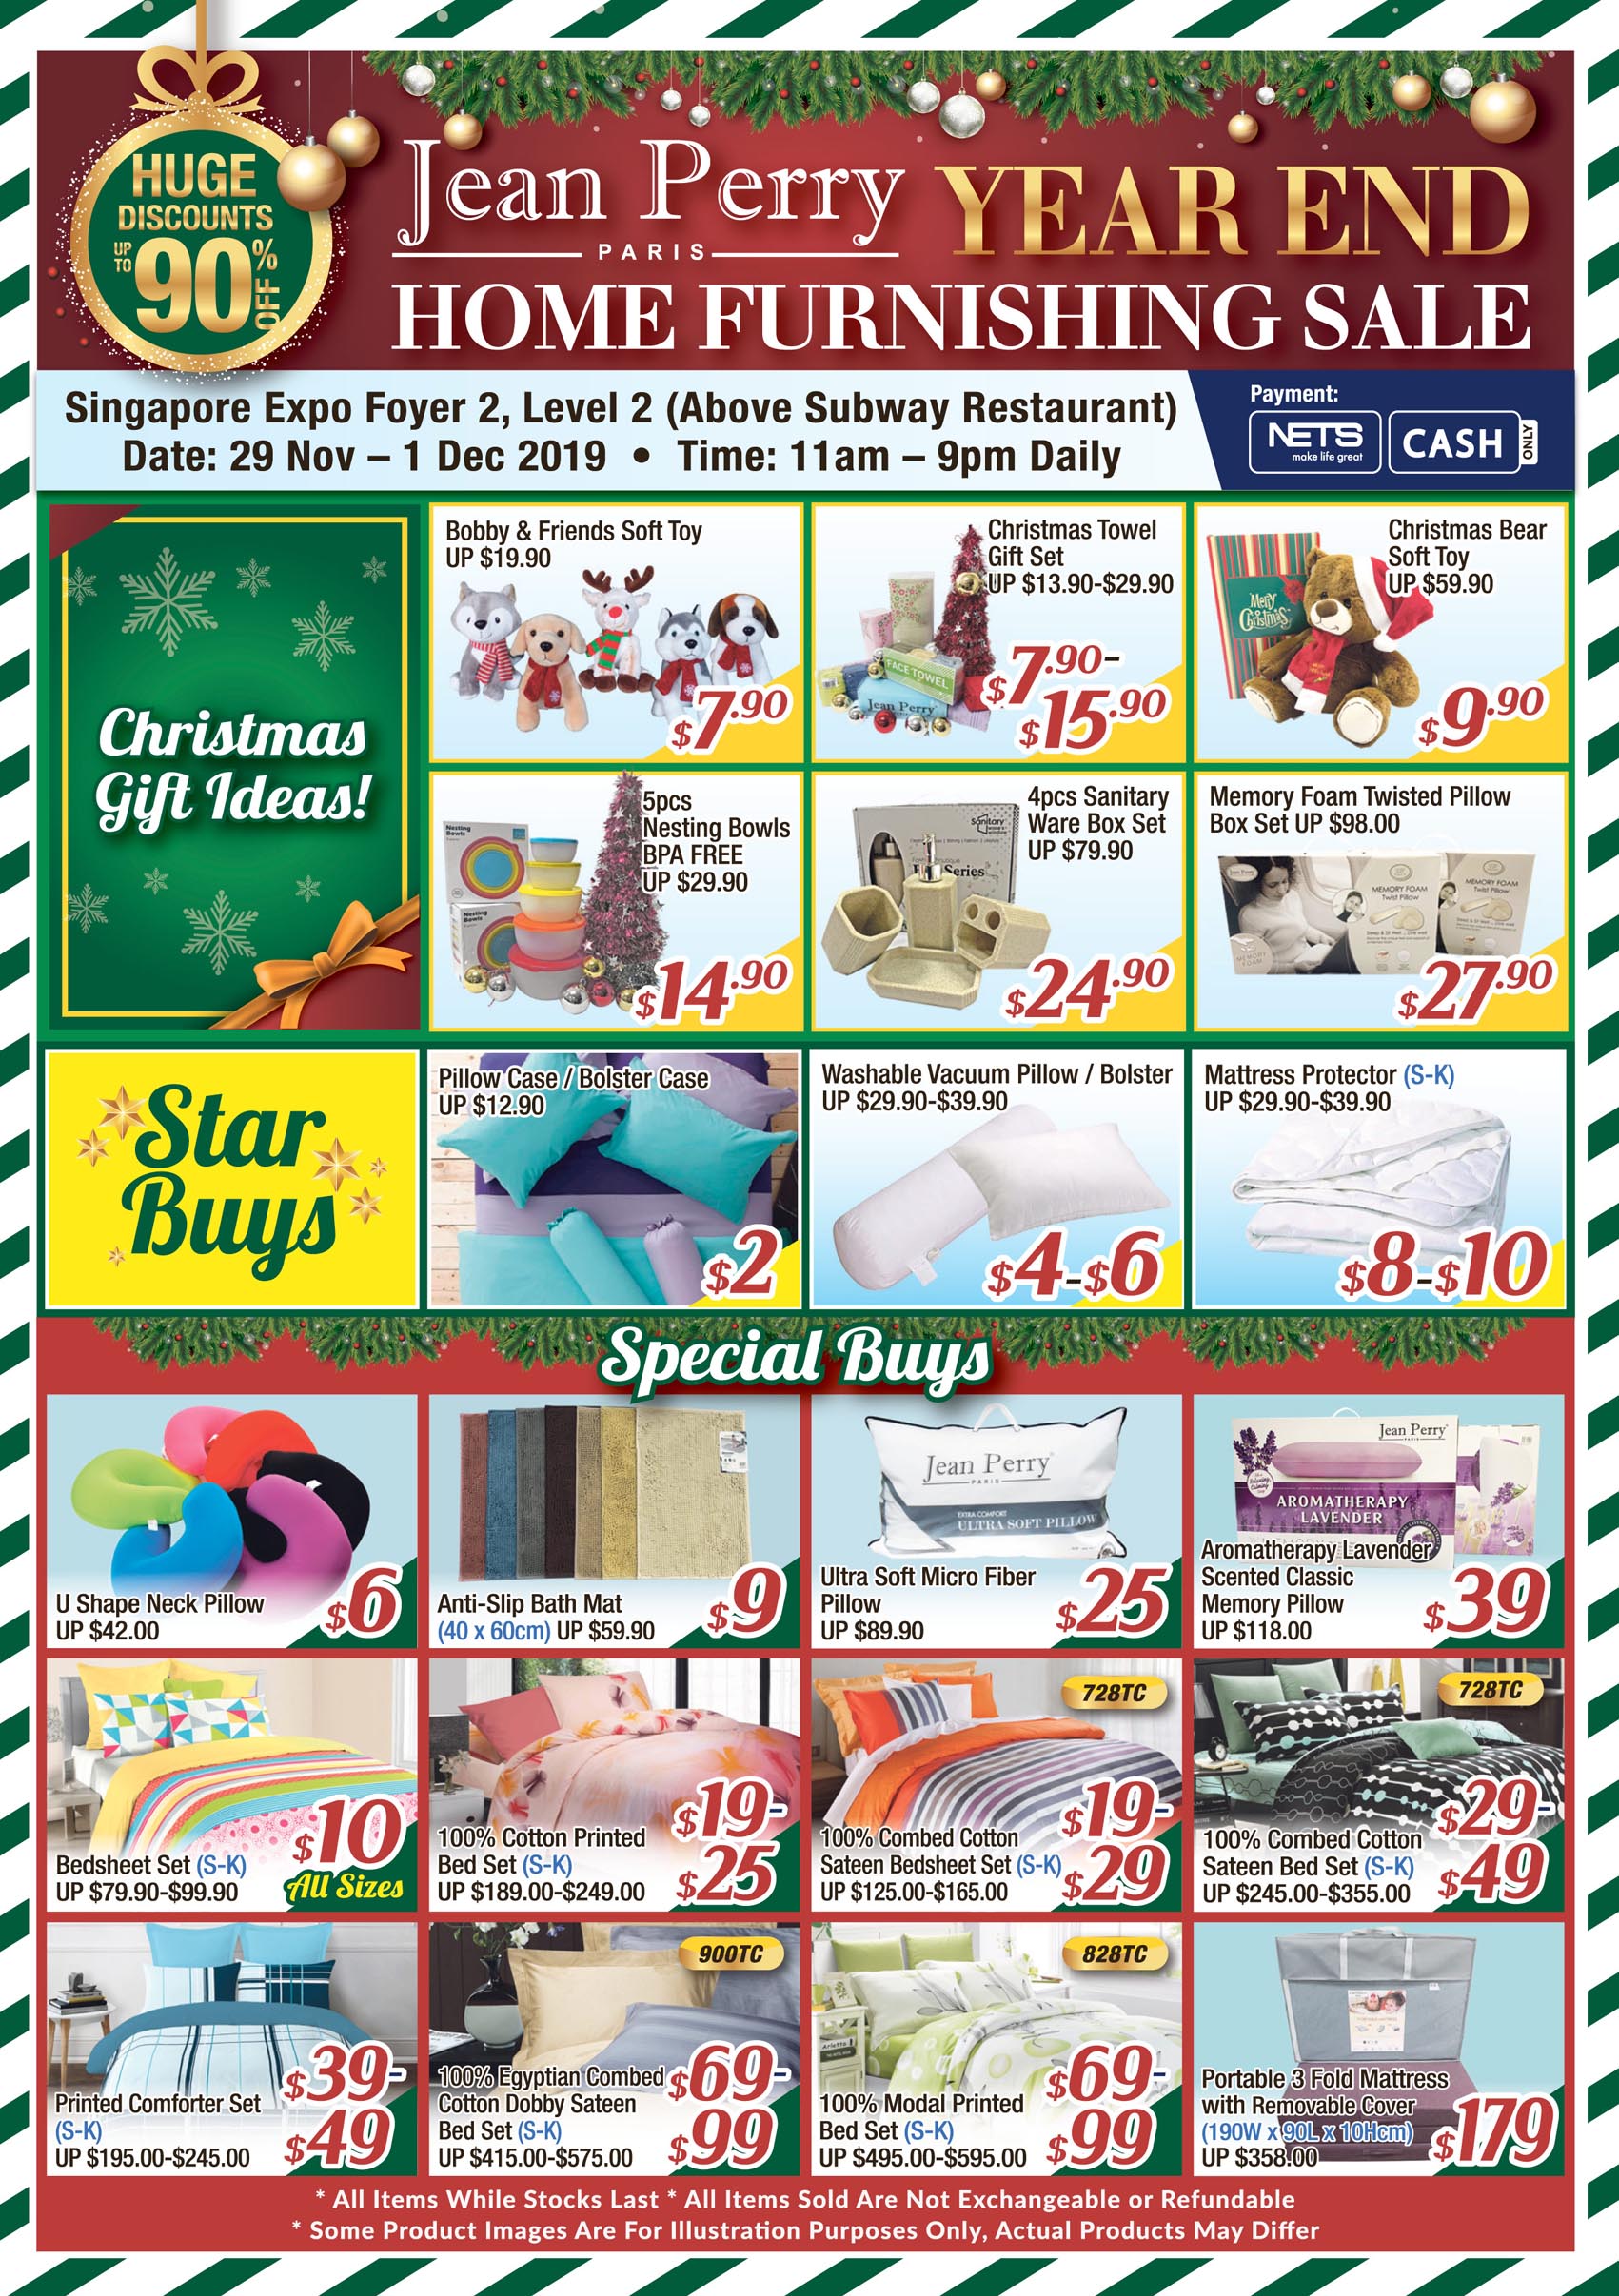 Jean Perry’s Year-End Expo Sale Has $4 Pillows, $8 Mattress Protectors, $10 Bedsheet Sets & More (29 Nov – 1 Dec 19) - 1